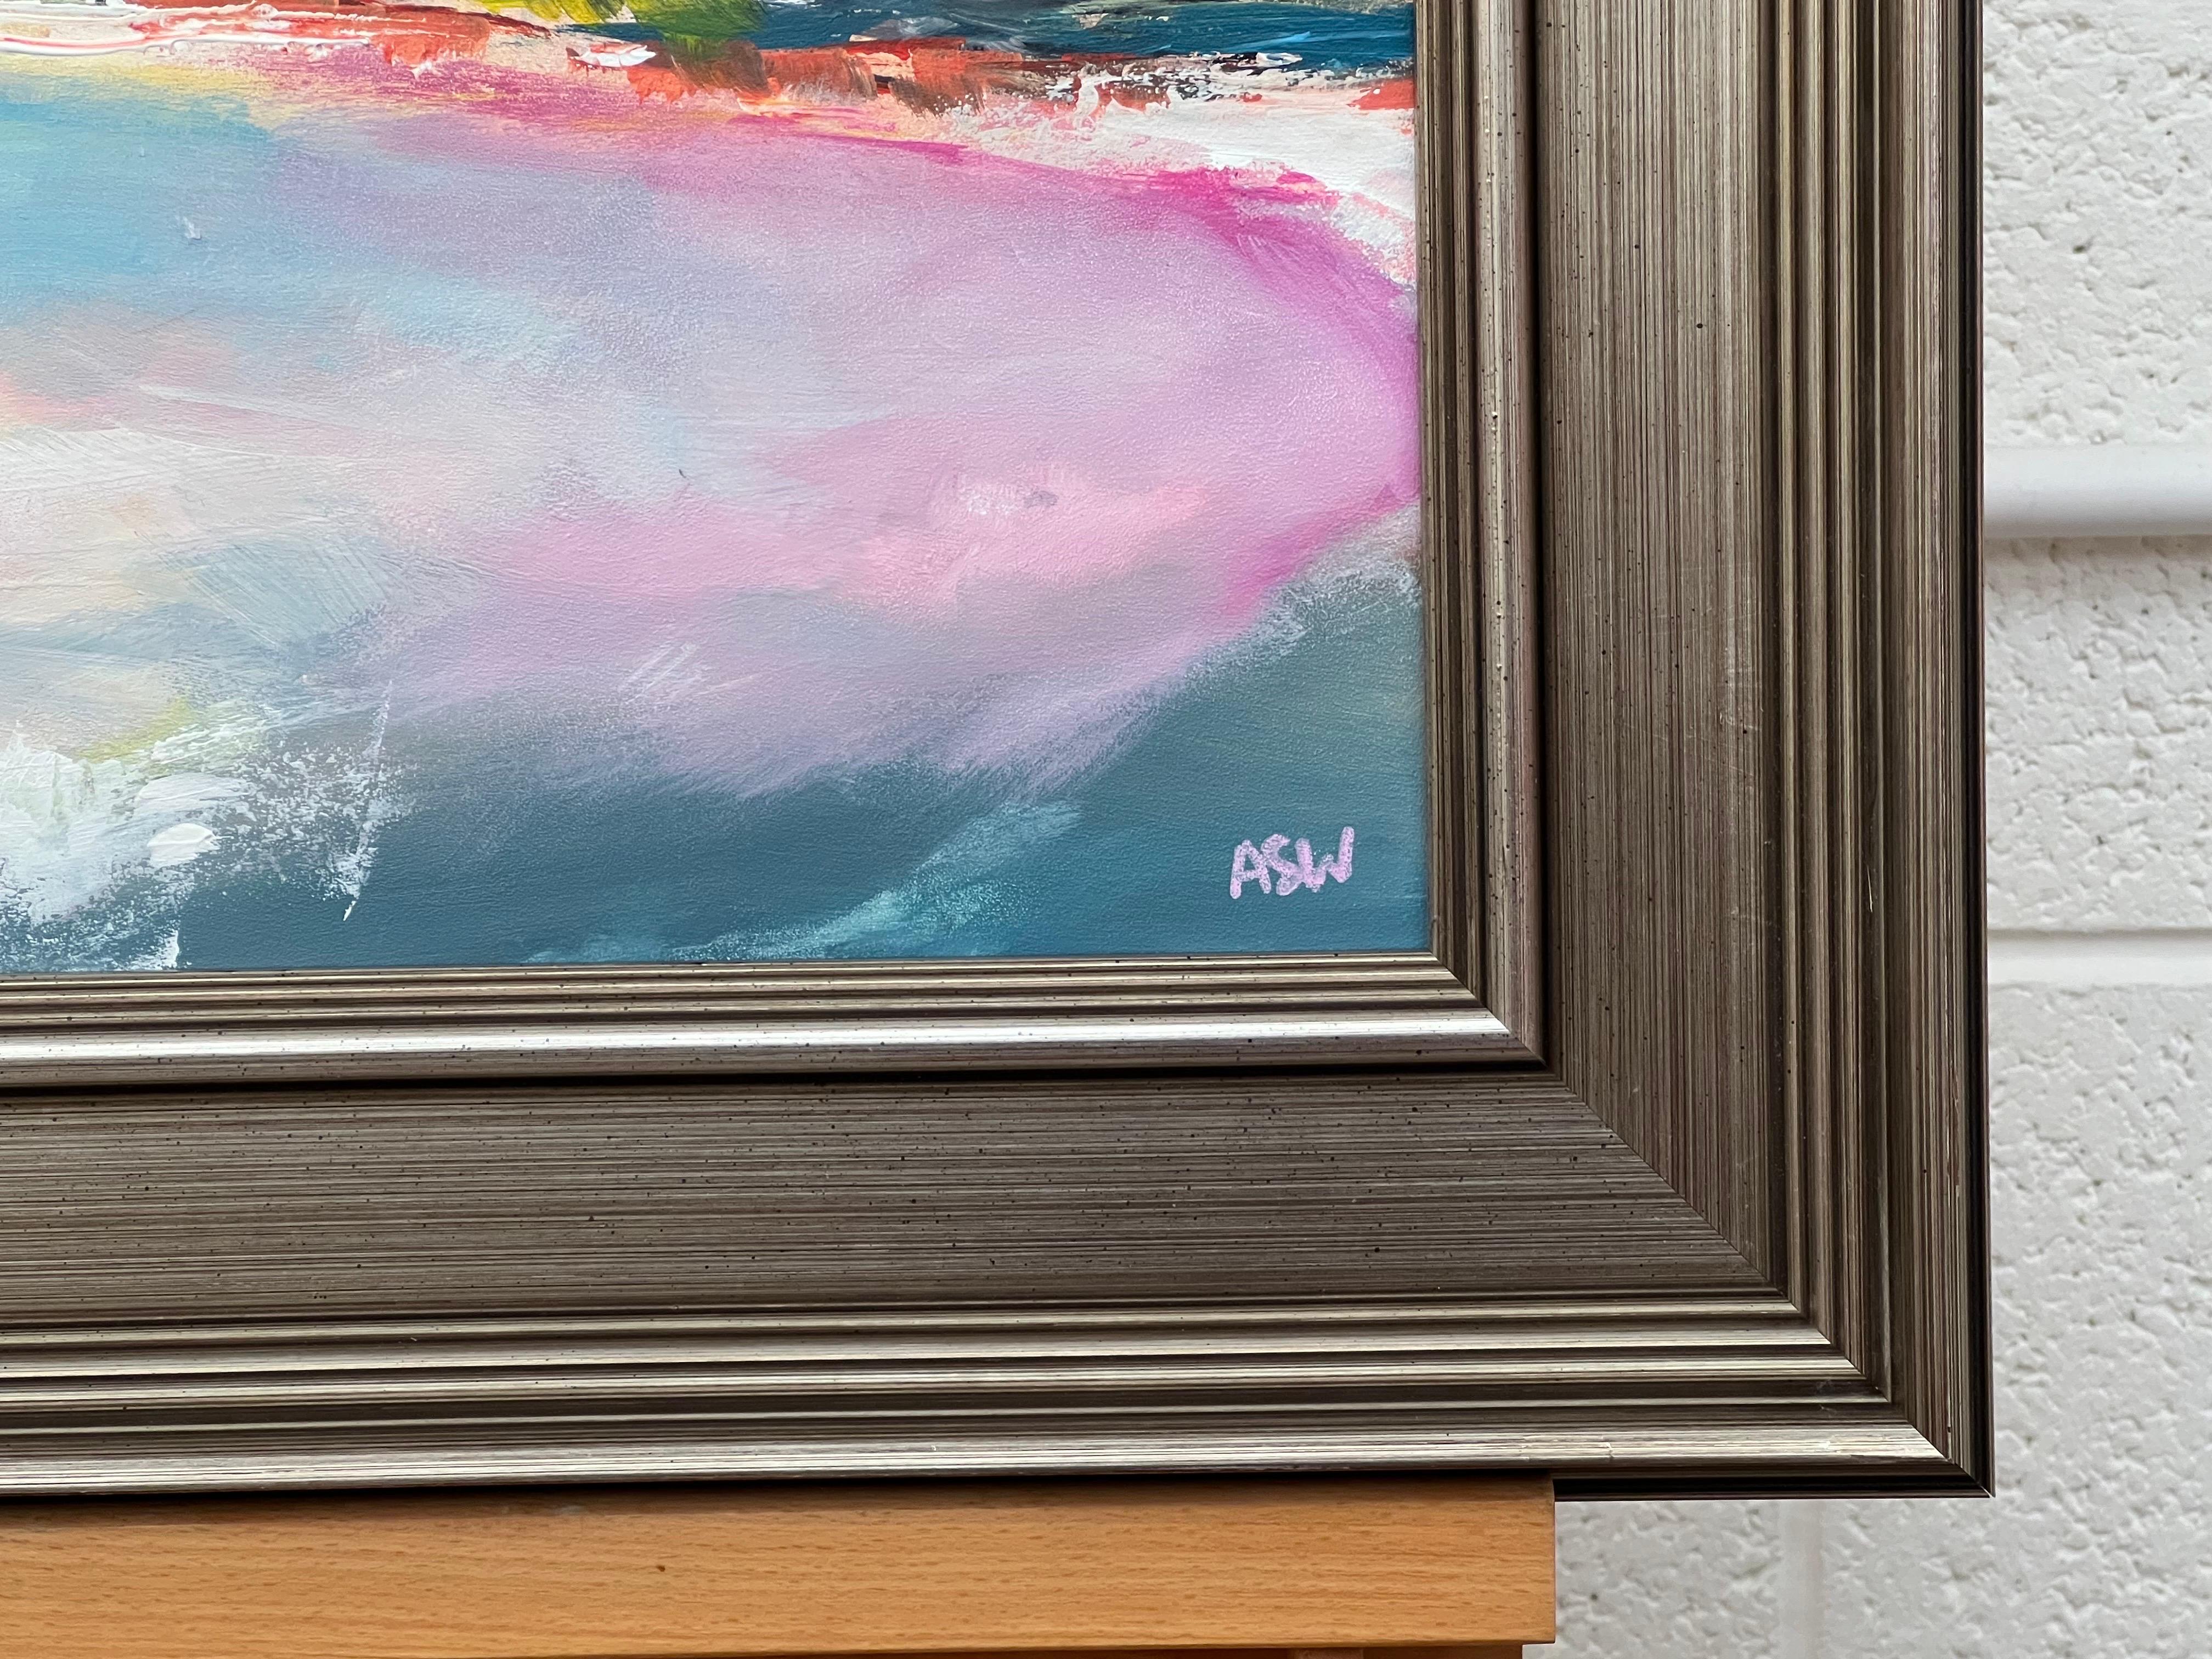 Abstract Landscape Seascape Art with Pink Blue & White Sky by British Artist For Sale 4